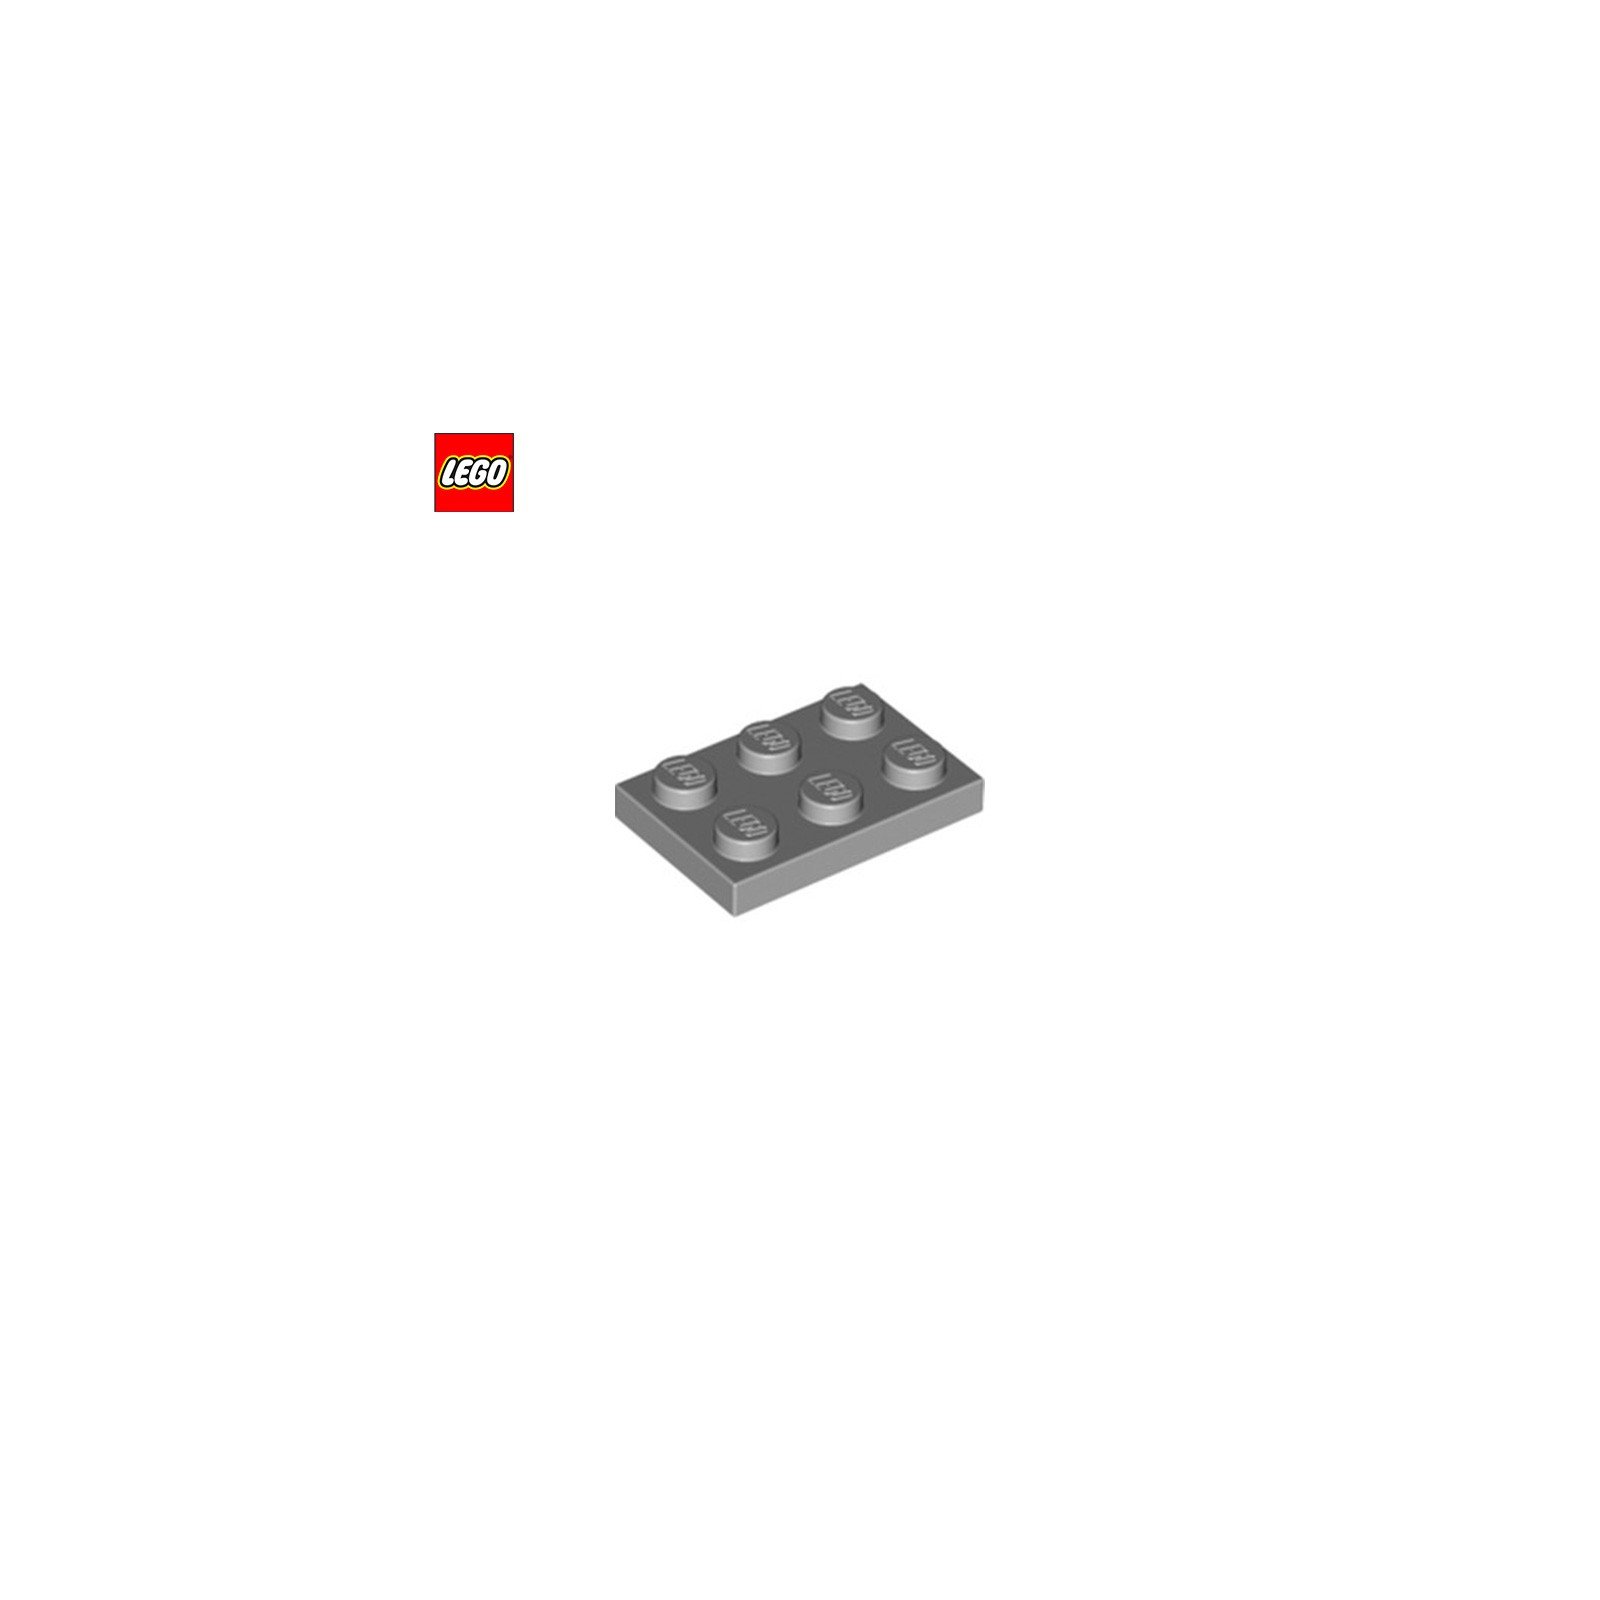 Plate 2x3 - LEGO® Part 3021